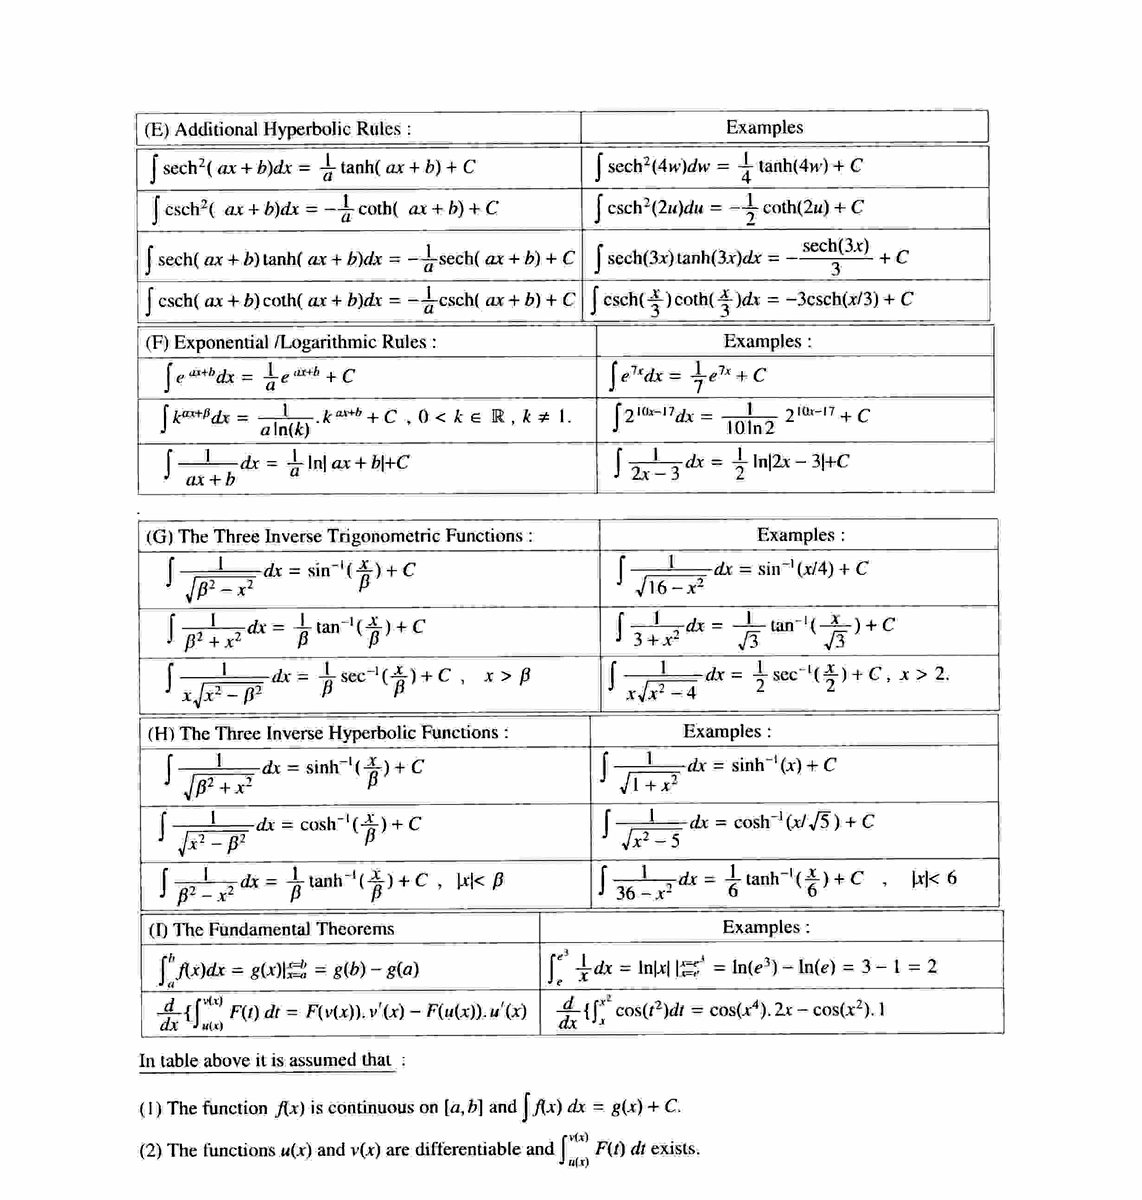 Table of integrals